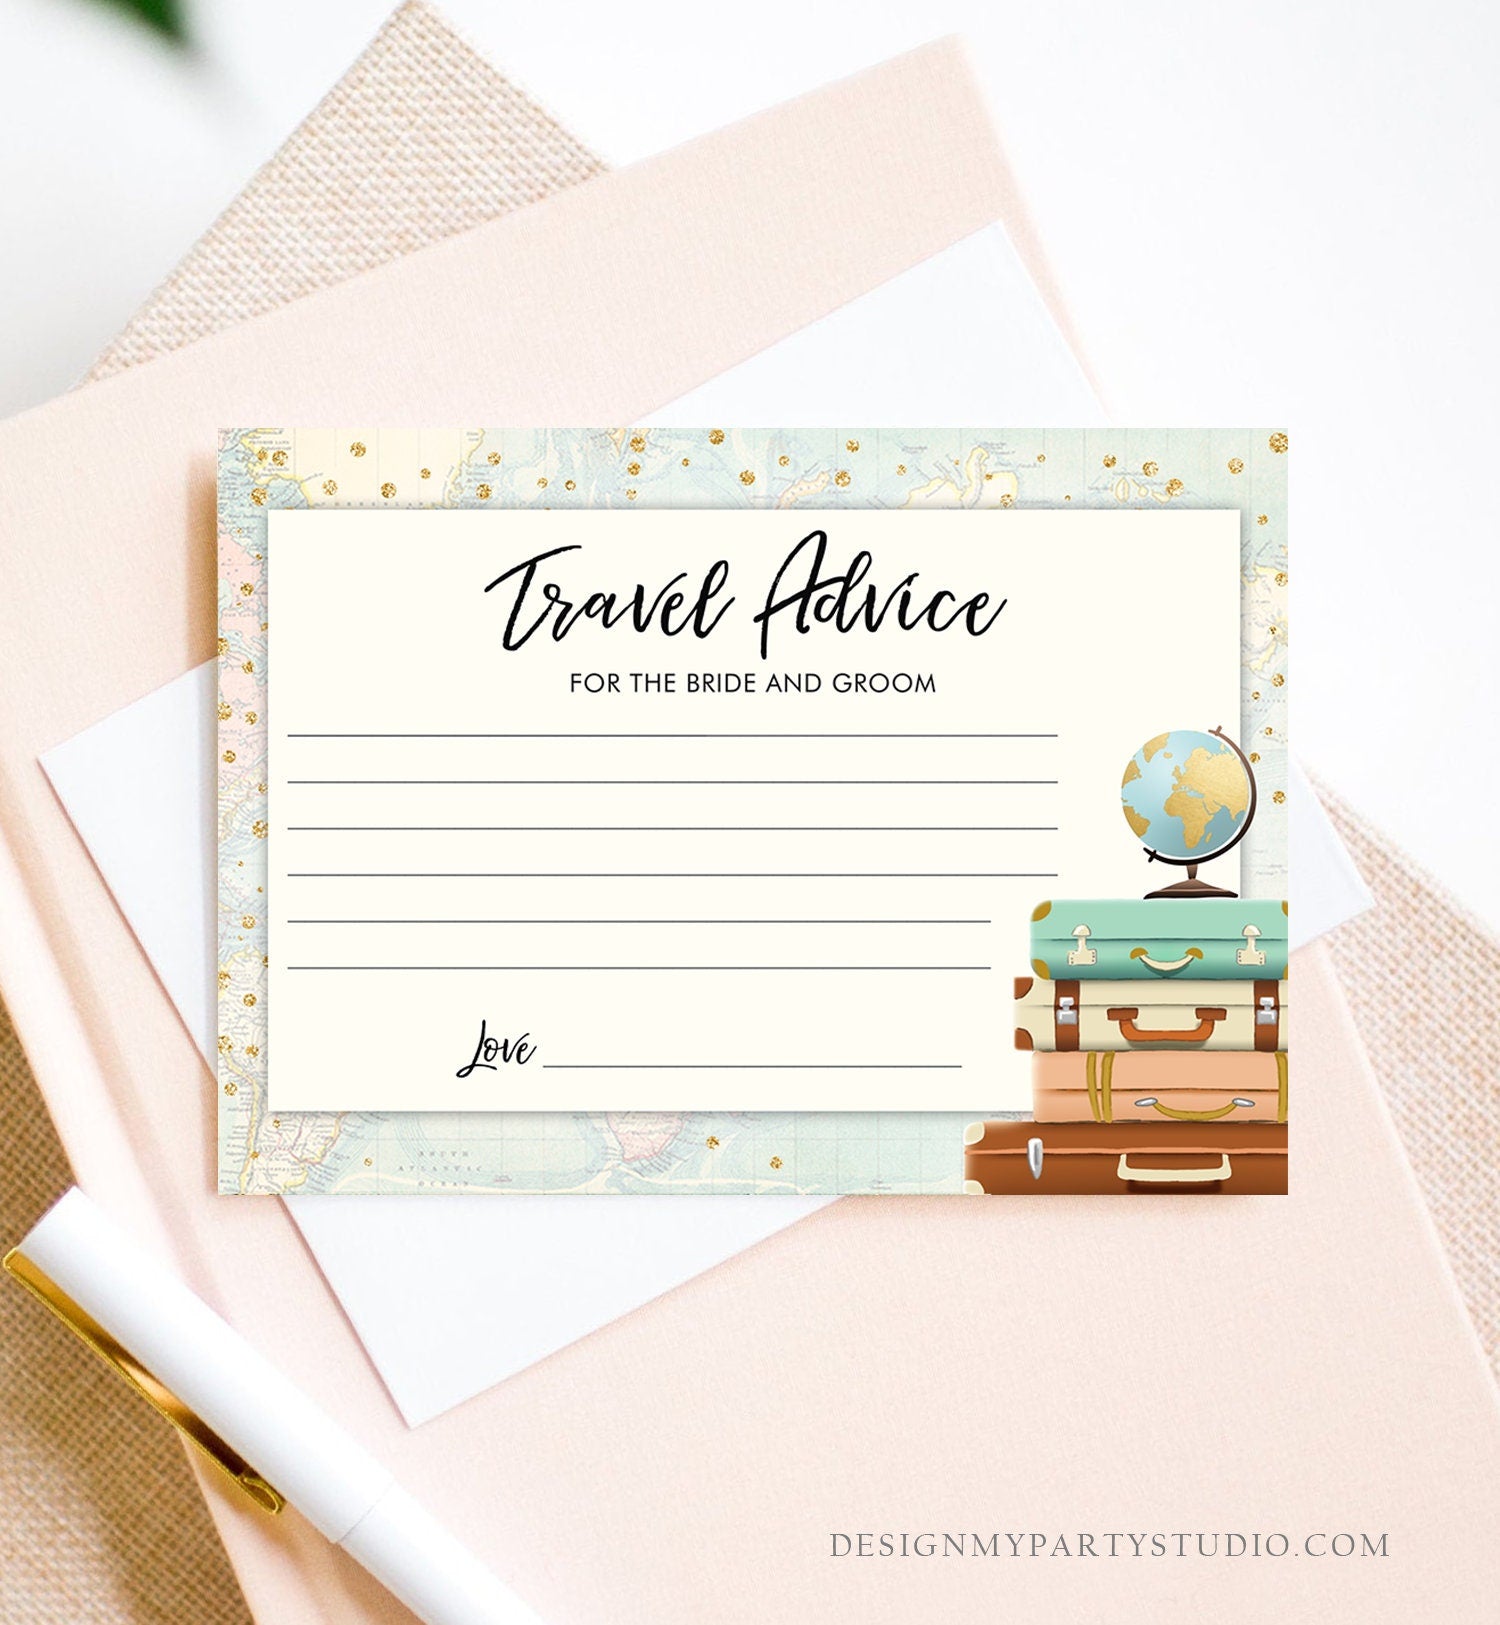 Editable Advice for the Bride-to-Be Card Bridal Shower Travel Words of Wisdom Advice for Bride Game Adventure Suitcases Corjl Template 0263